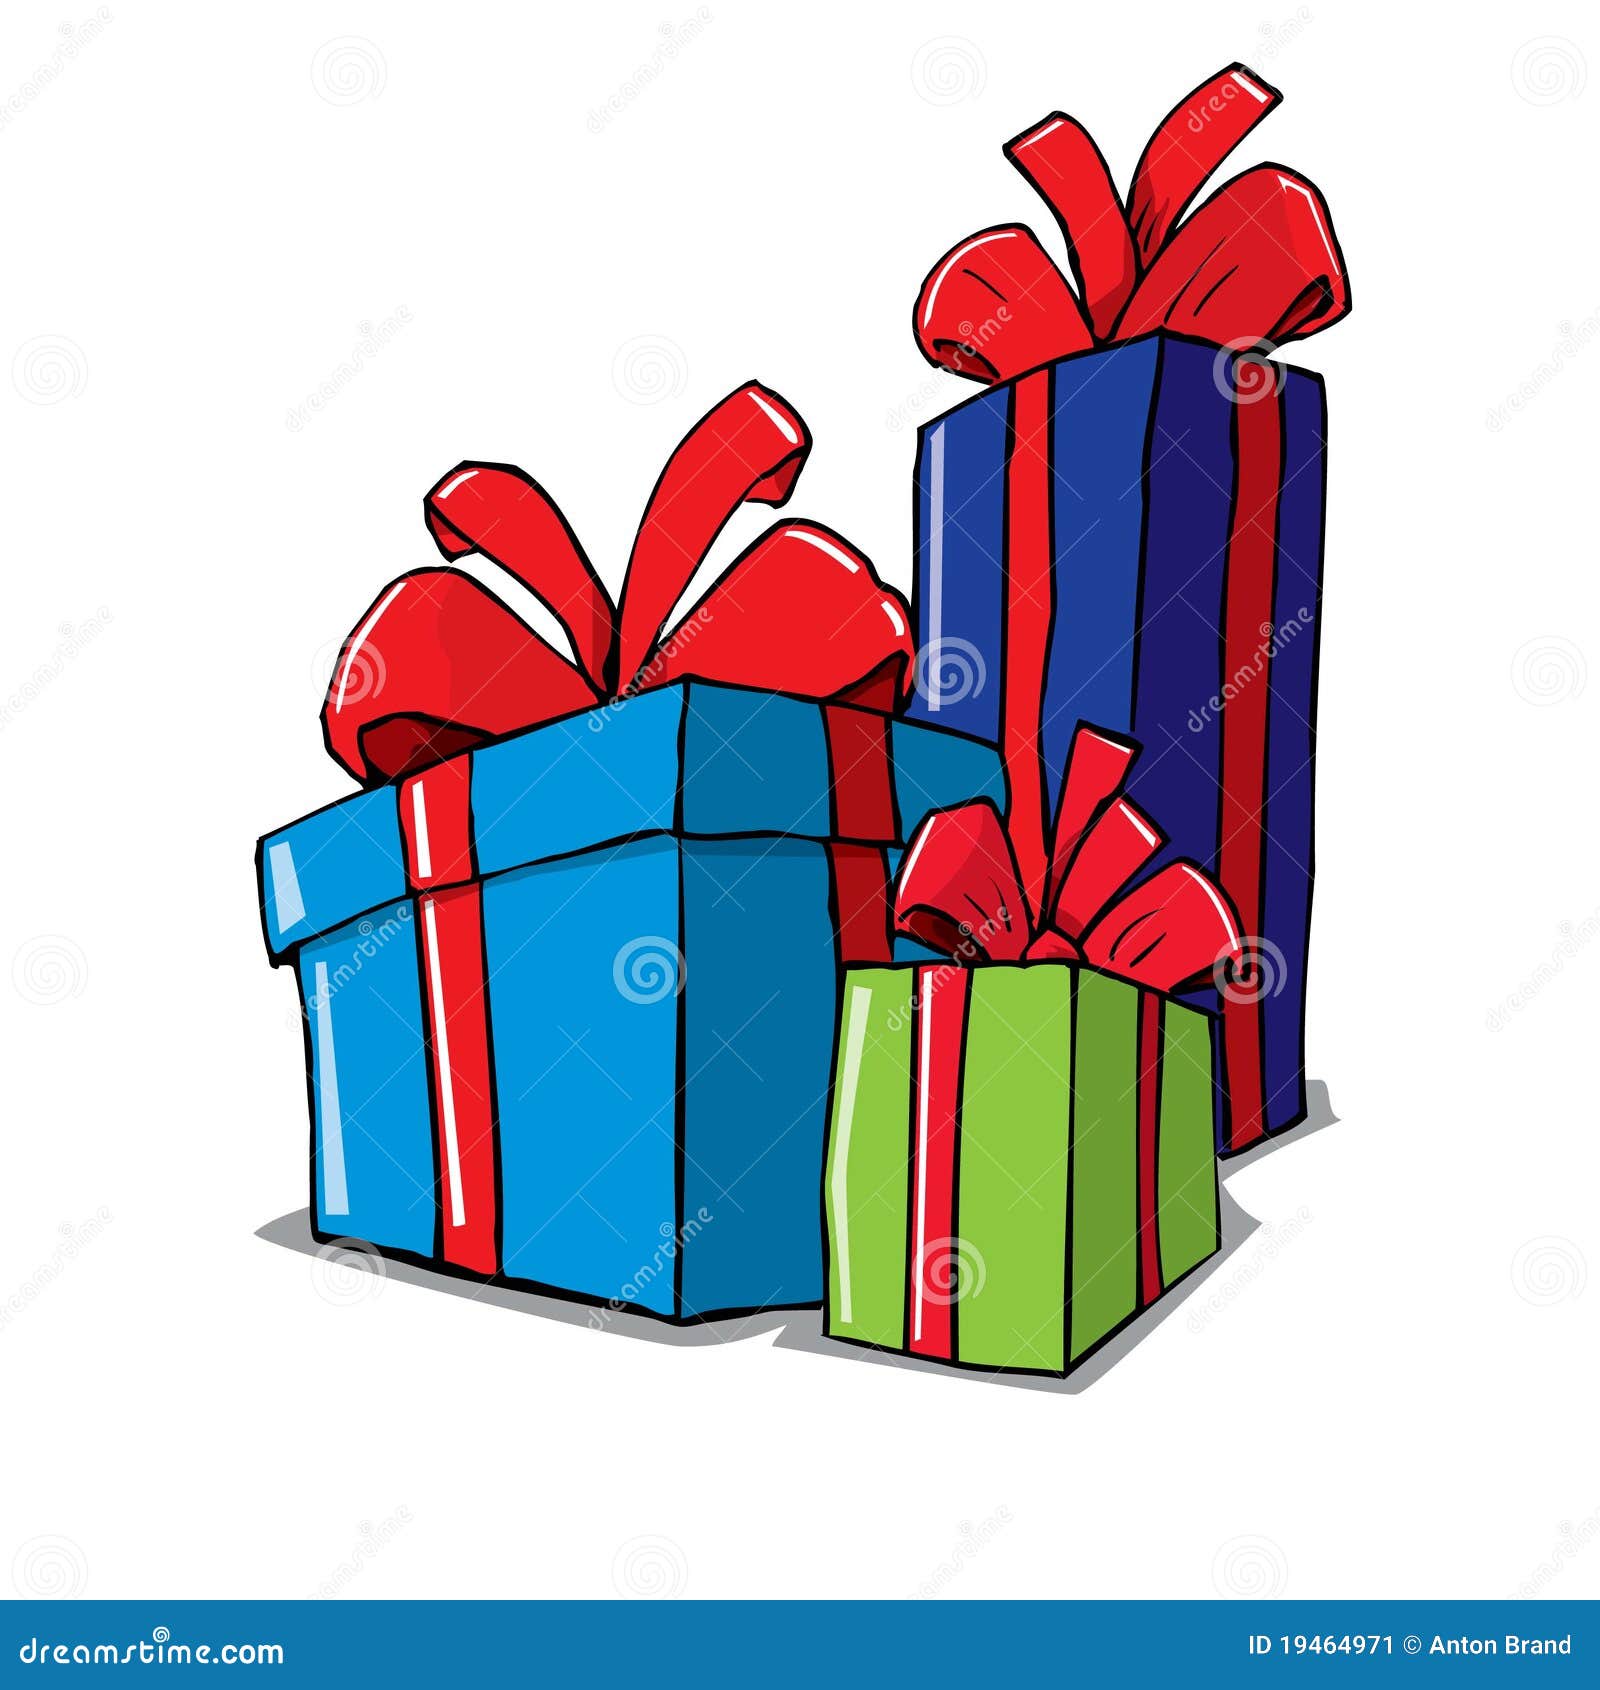 Cartoon Of Group Of Christmas Gifts Stock Image - Image: 19464971